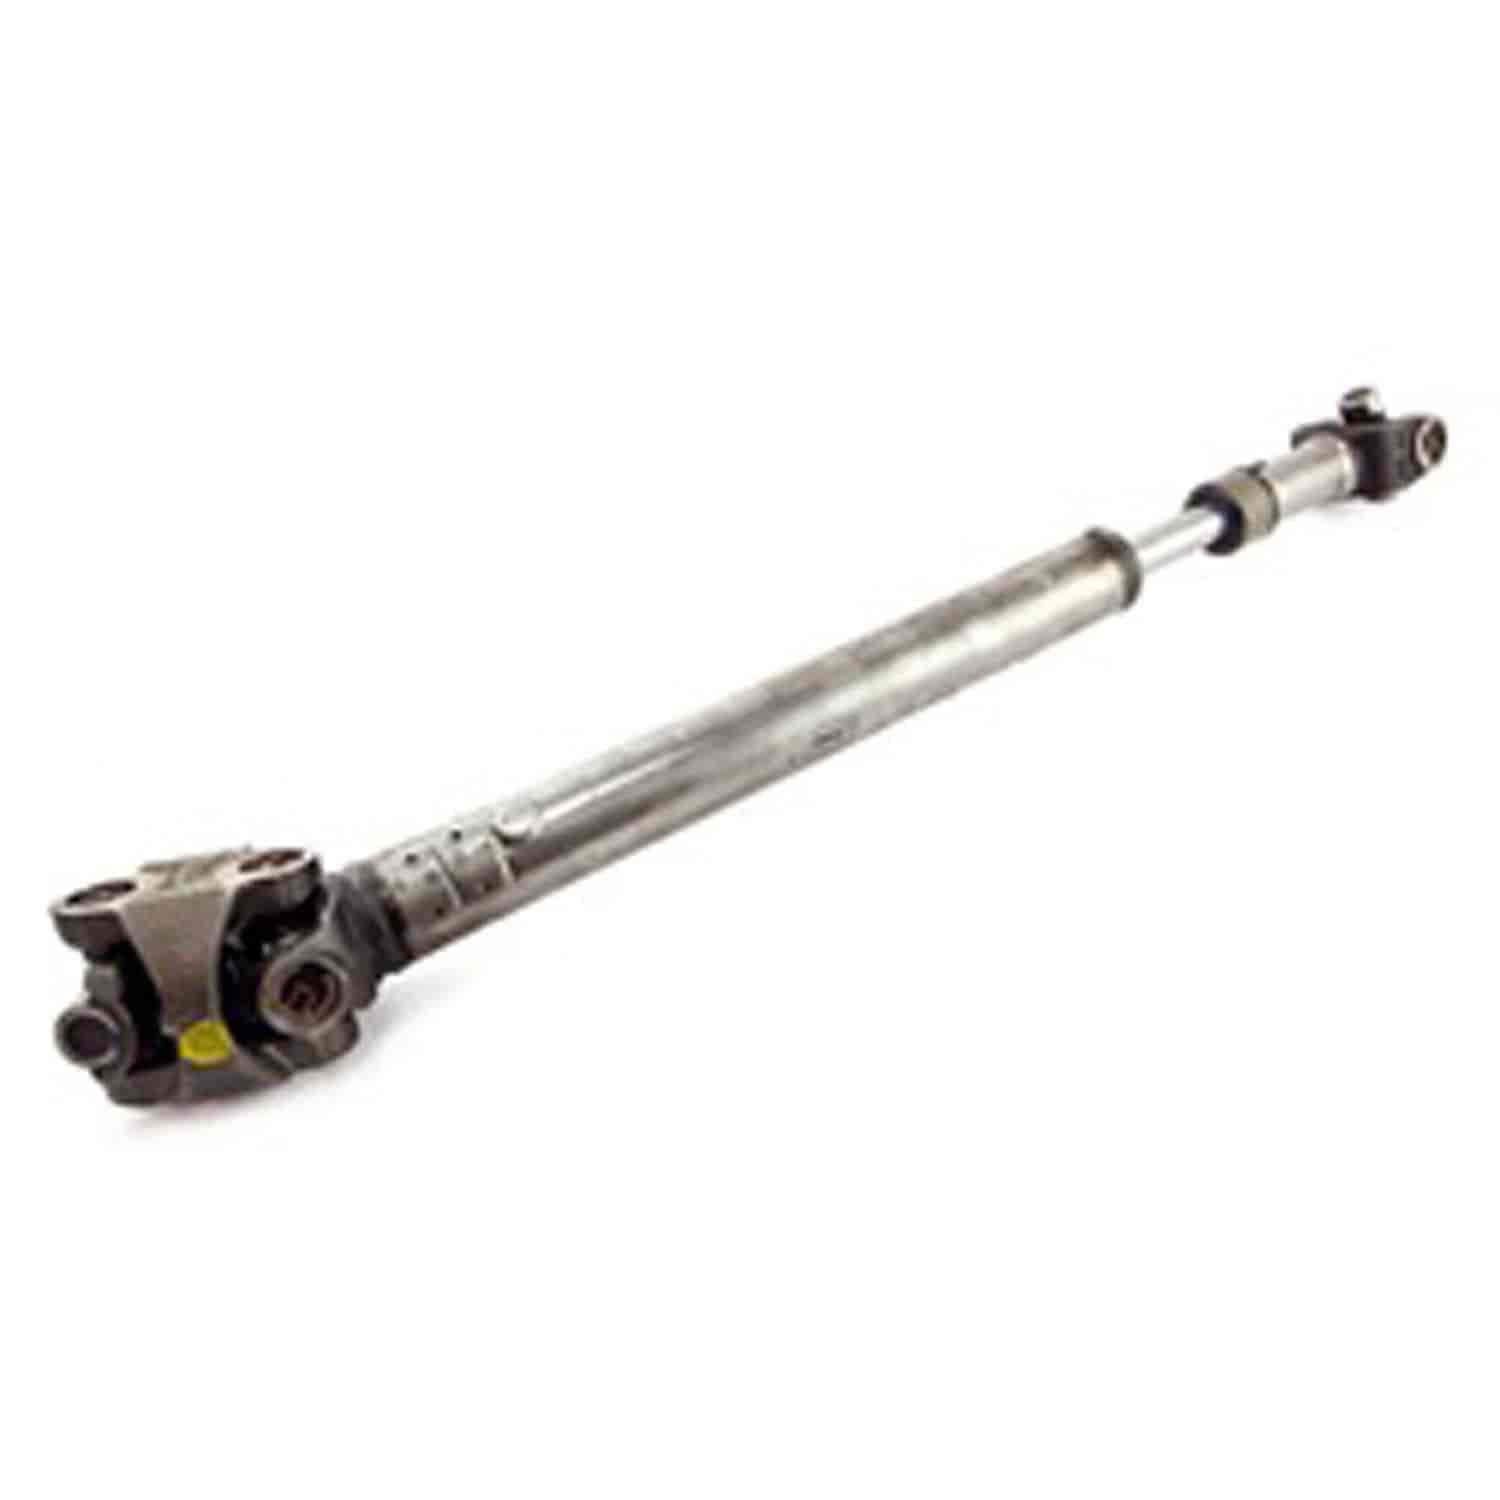 Stock replacement front driveshaft from Omix-ADA, Fits 92-93 Jeep Grand Cherokee ZJ with a 6-cyl